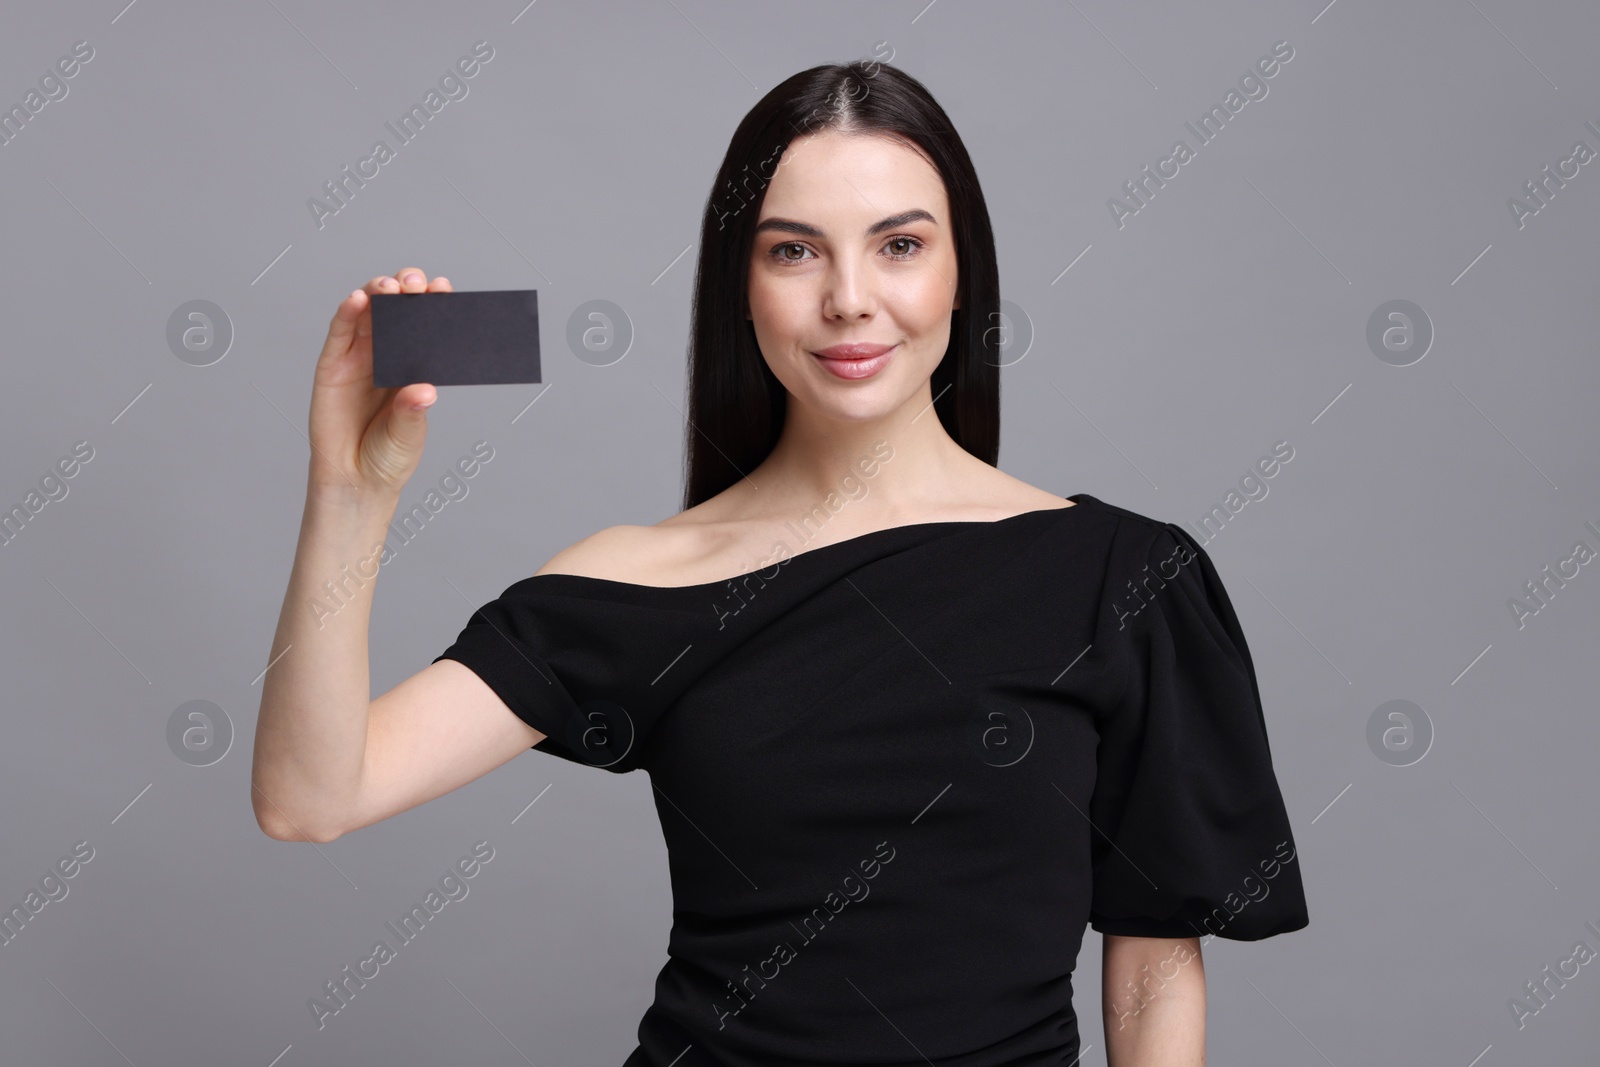 Photo of Woman holding blank business card on grey background